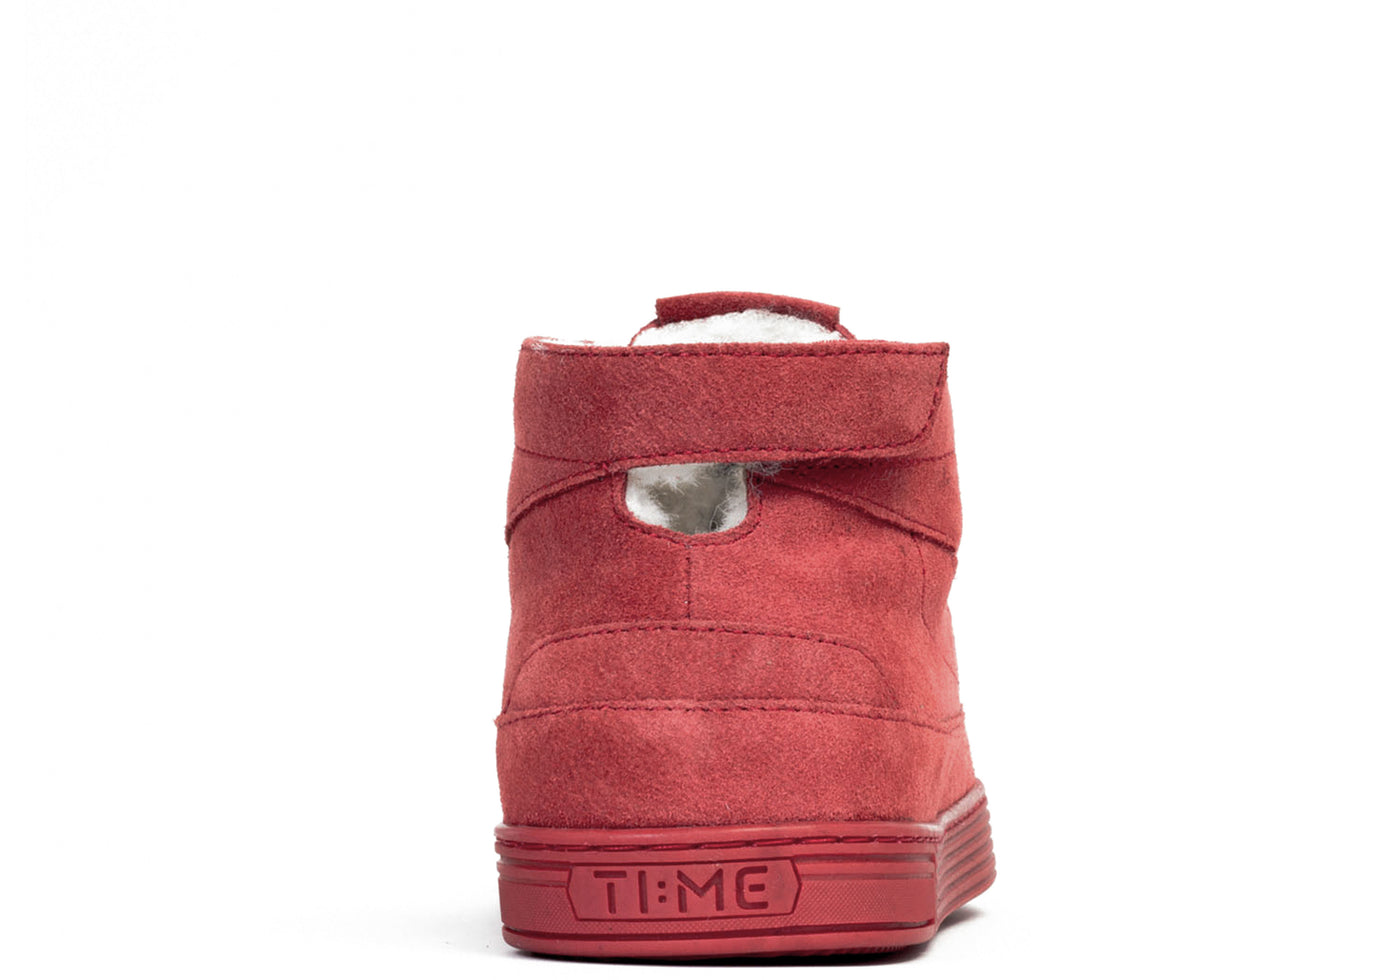 TIME Slippers-Women's Mid-top Slippers, #color_suede-candy-red